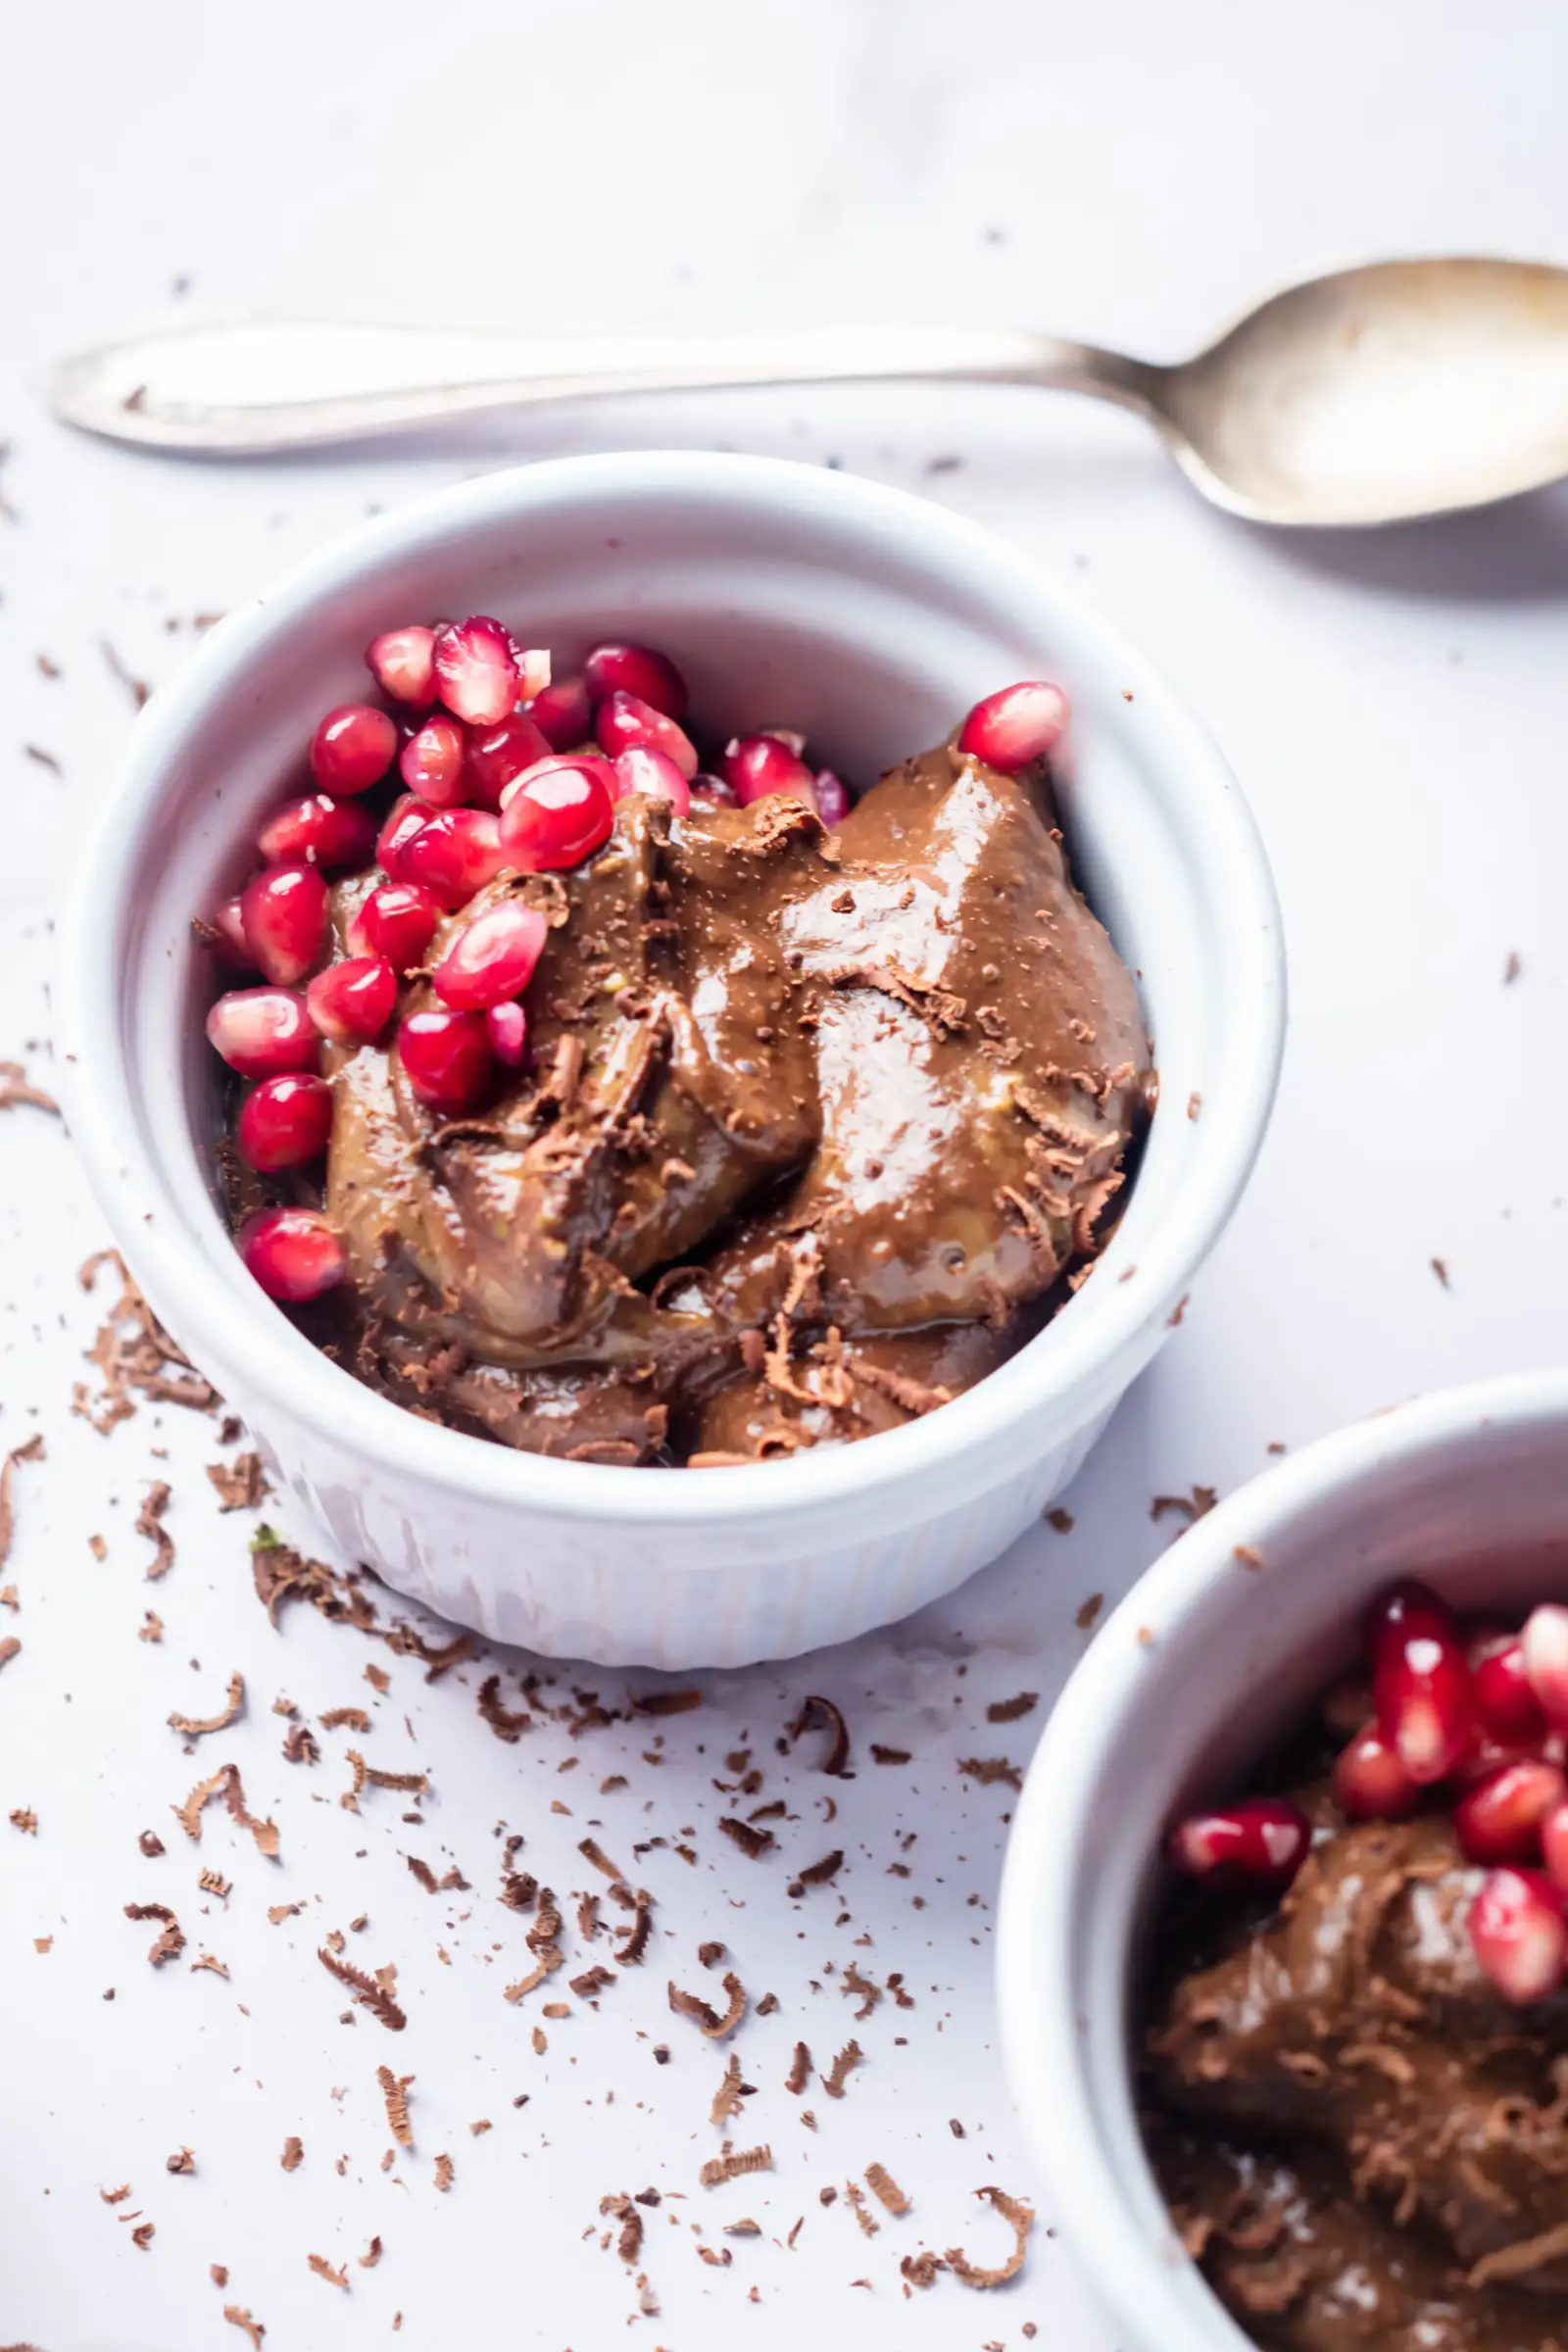 vegan chocolate avocado mousse in a white ramekin decorated with pomegranate seeds on top, another ramekin visible next to it and a spoon behind